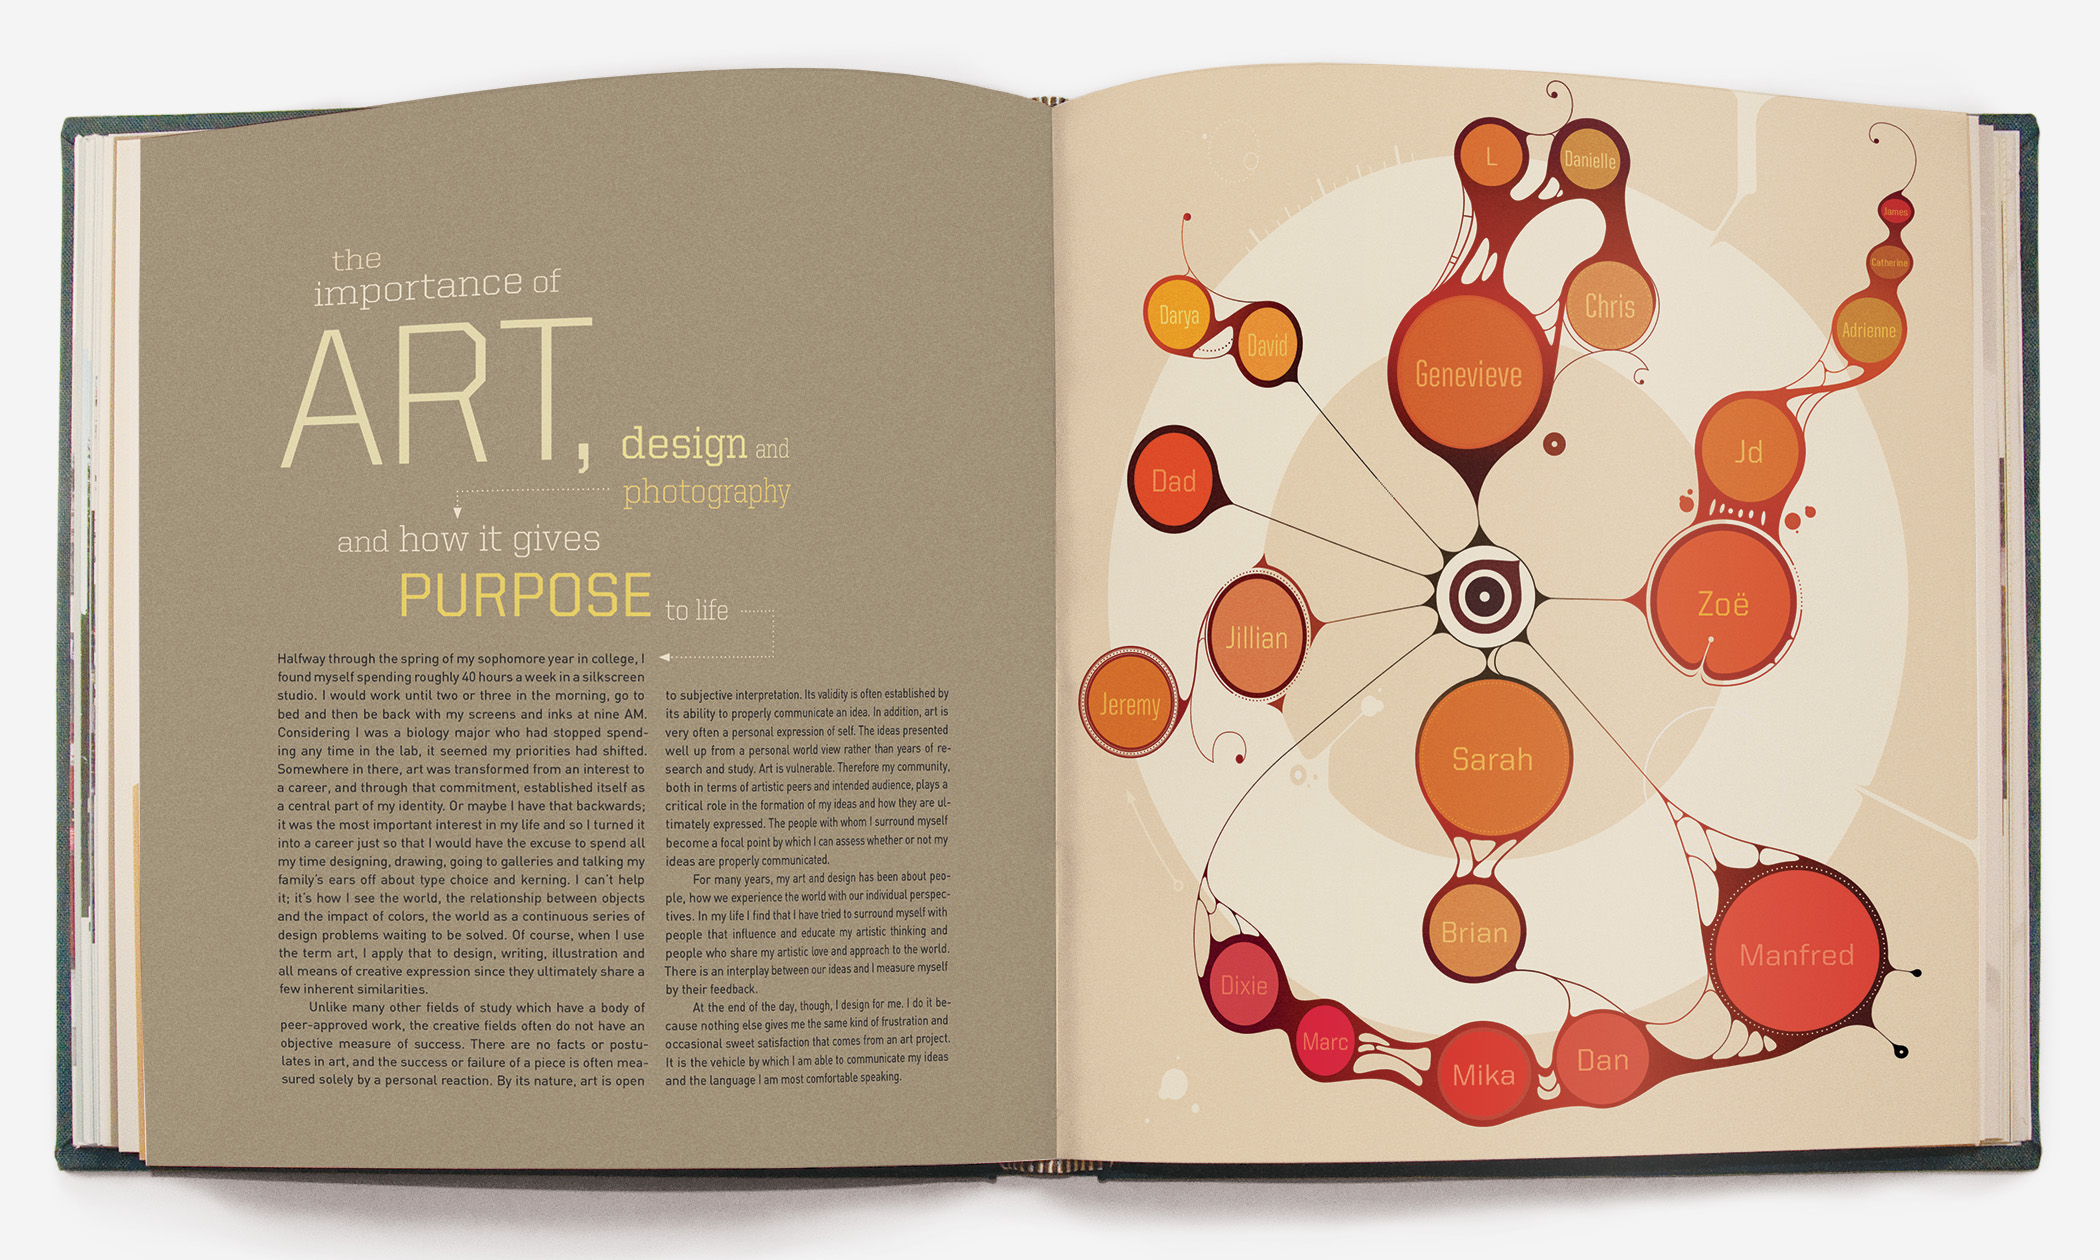 Book spread with the headline "the importance of art, design and photography and how it gives purpose to life"